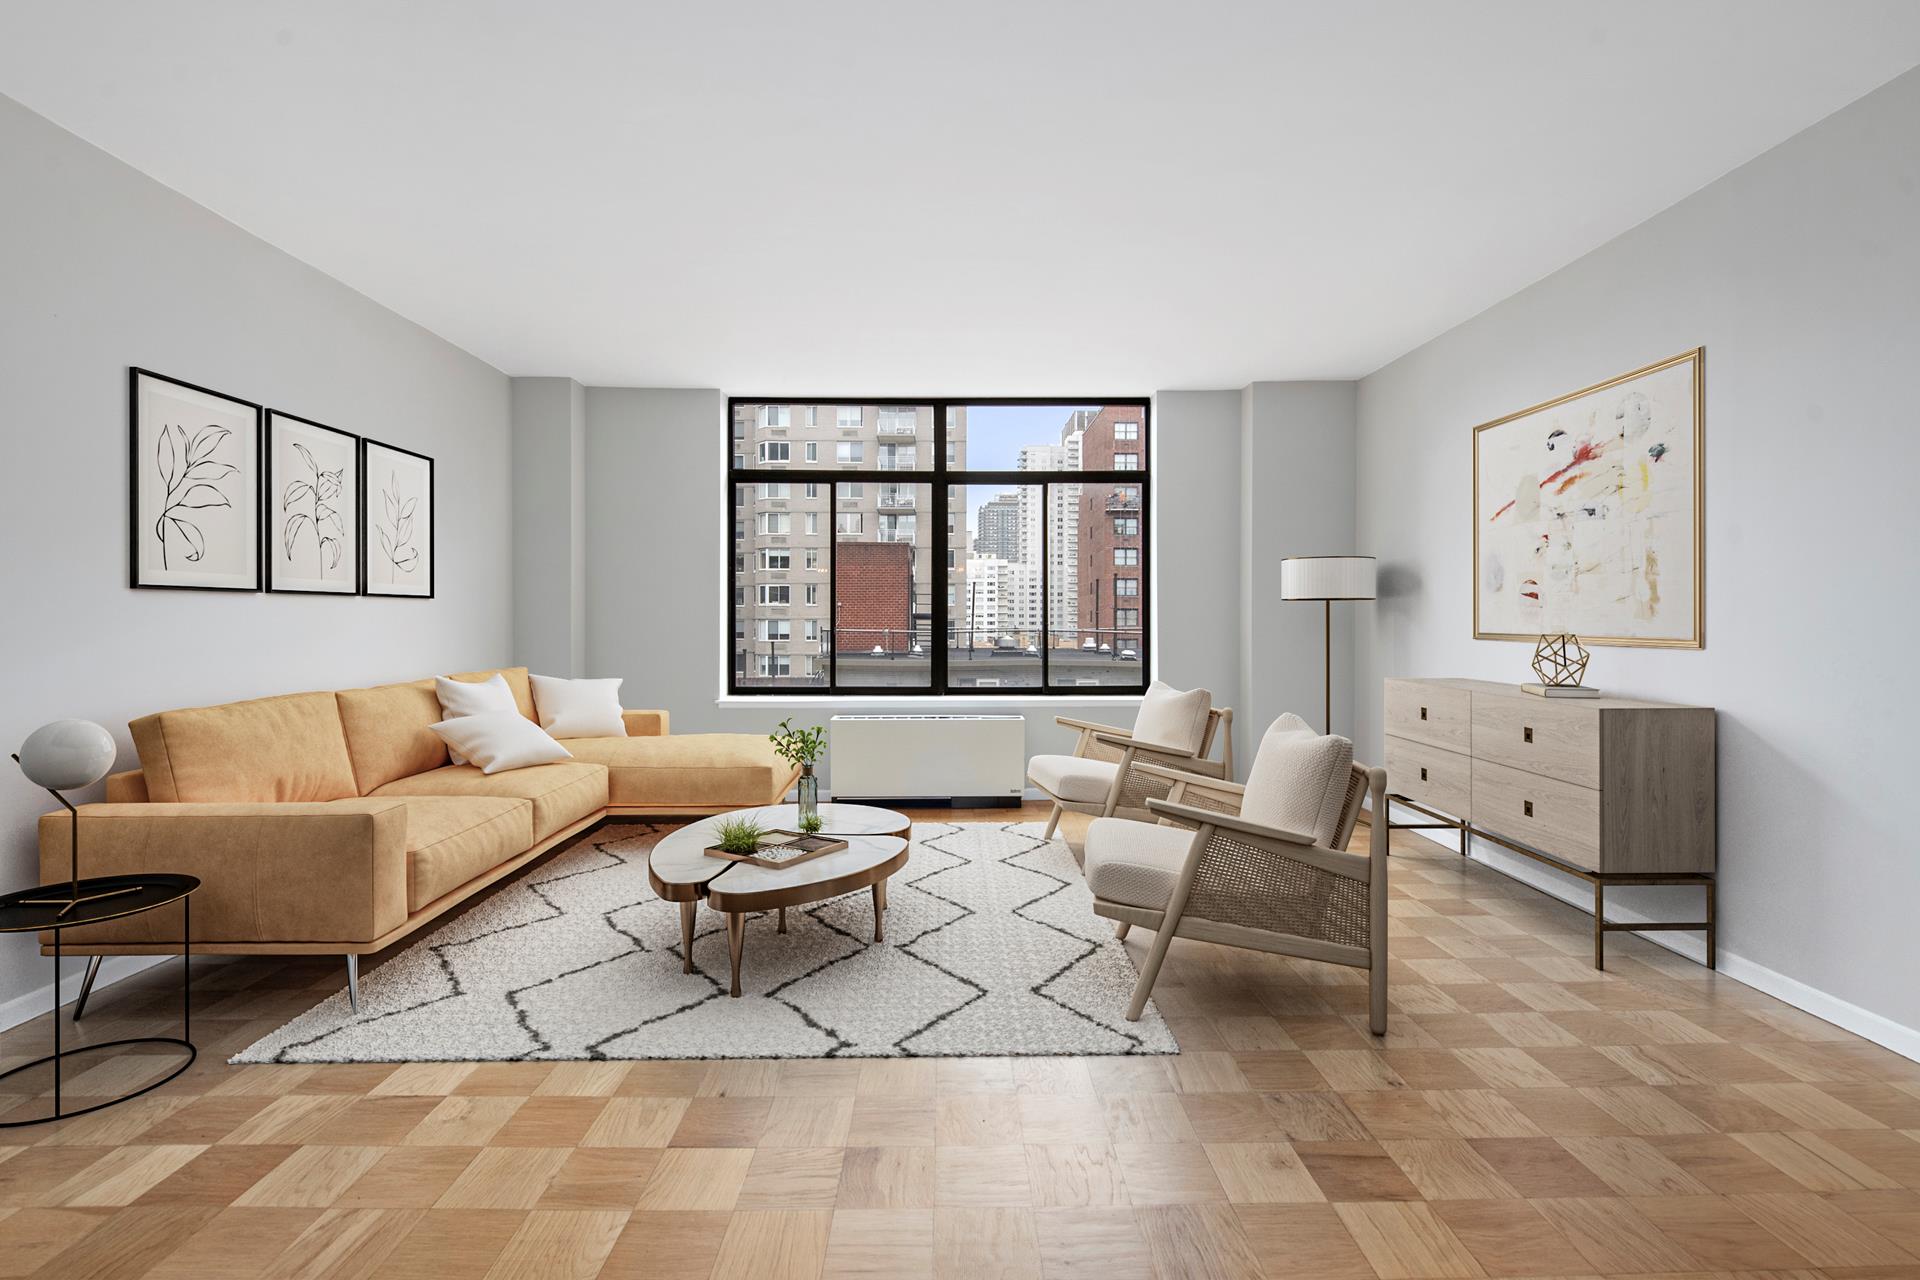 525 East 80th Street 10B, Yorkville, Upper East Side, NYC - 4 Bedrooms  
3.5 Bathrooms  
10 Rooms - 